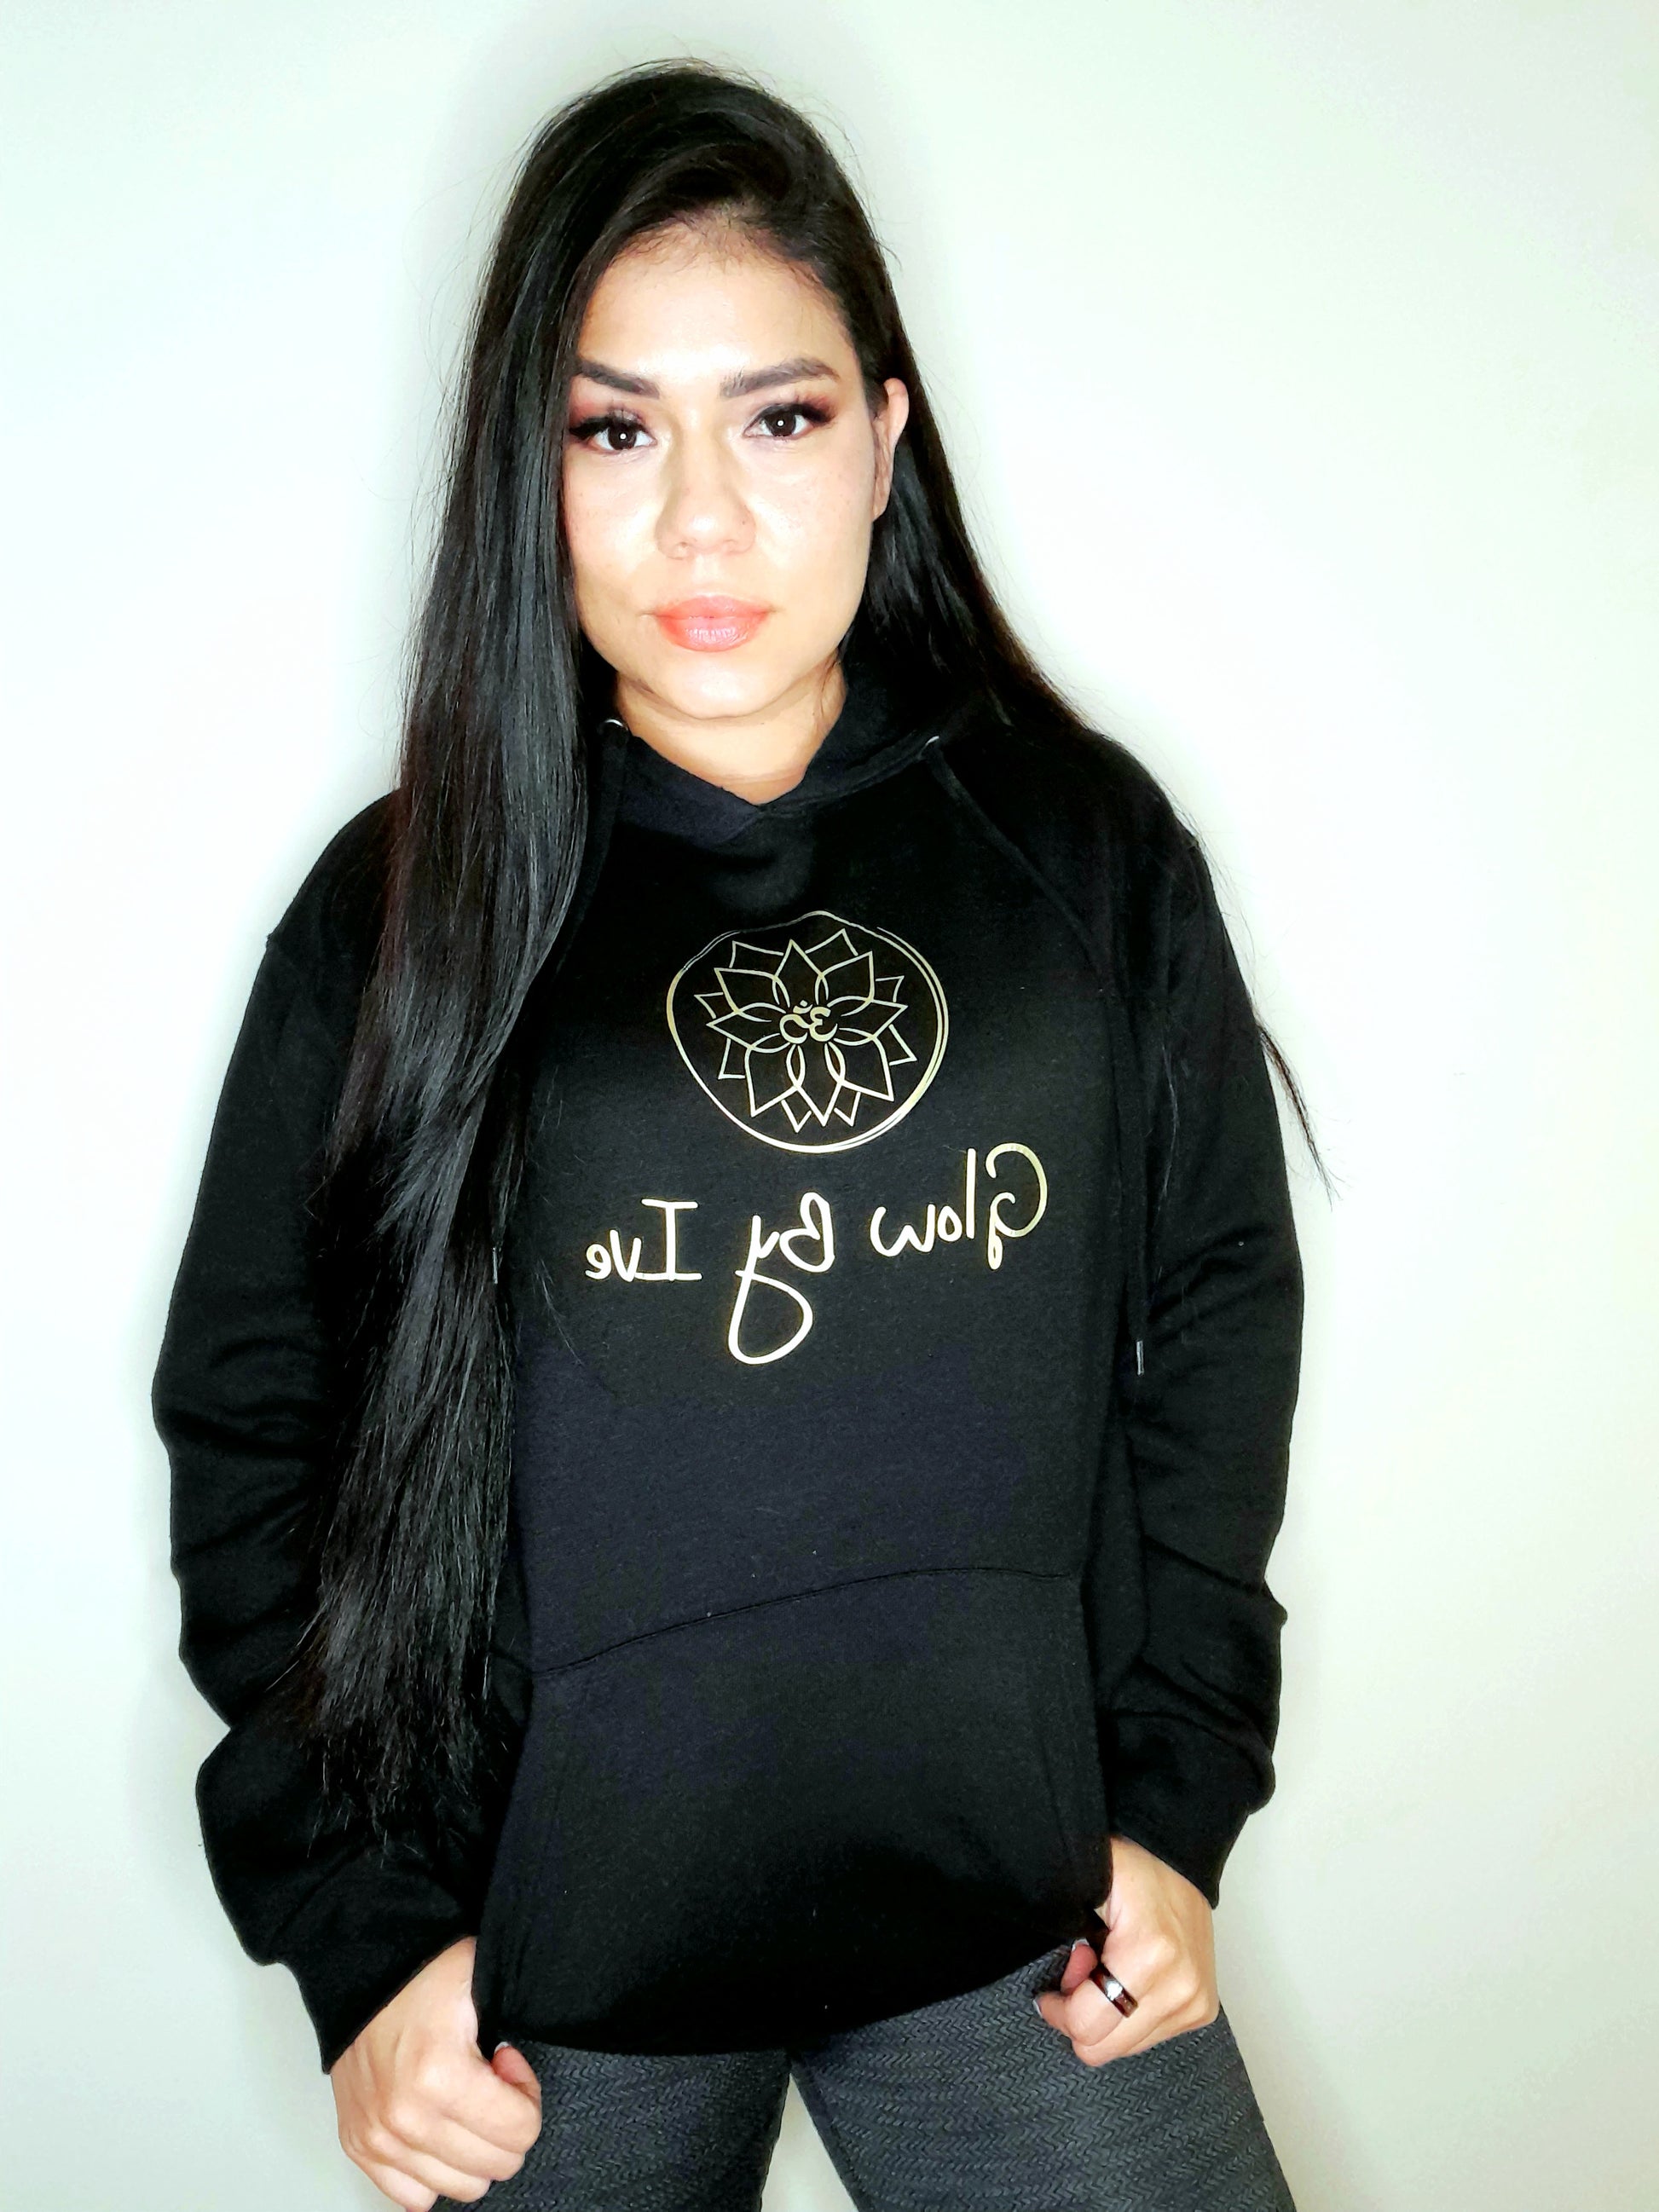 OM Sweater by Glow By Ive freeshipping - Glow By Ive